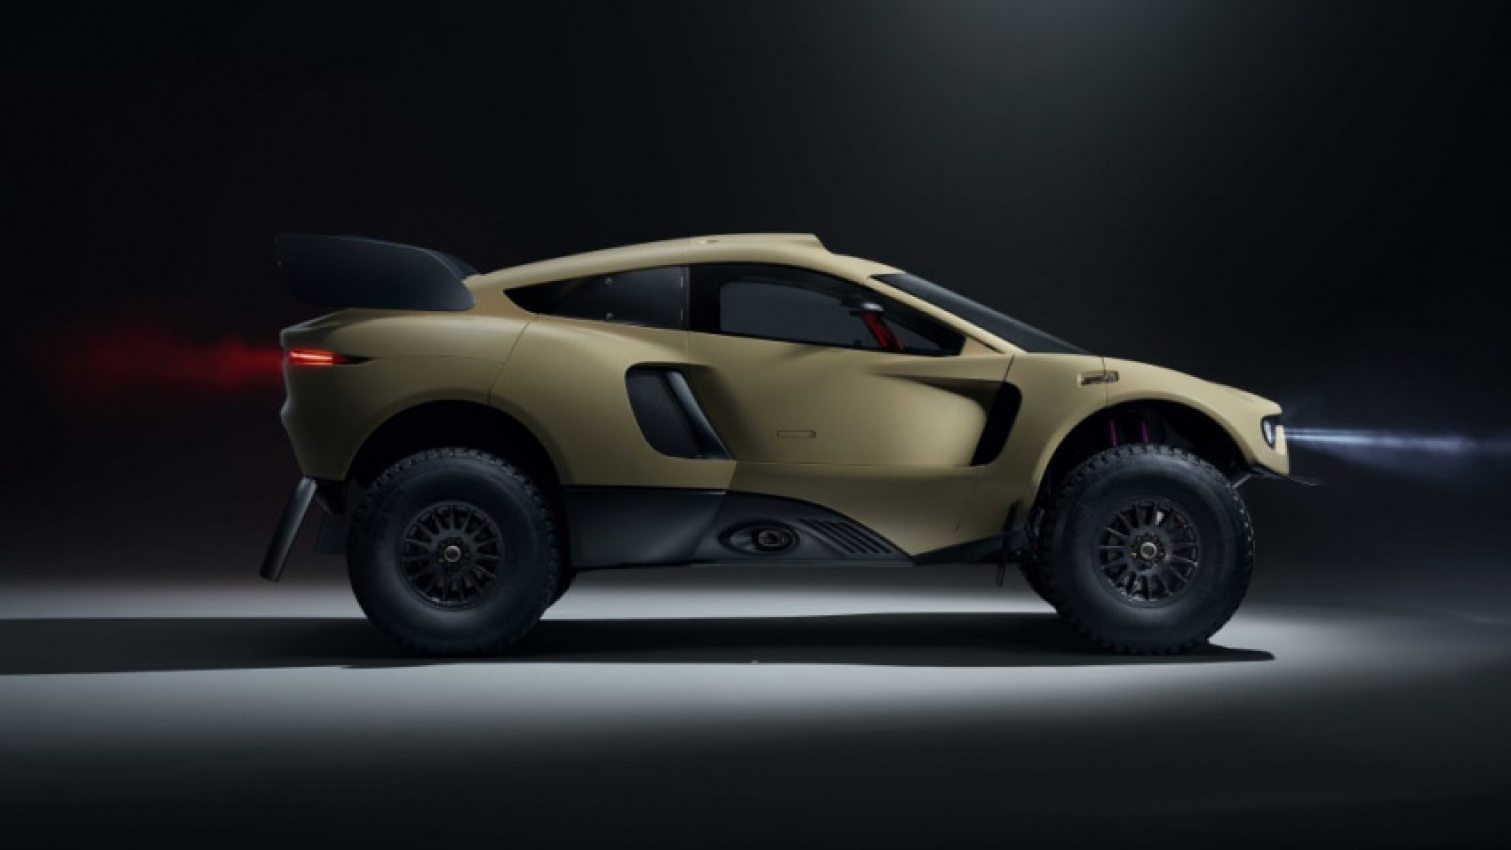 acer, aftermarket, autos, cars, aftermarket, off-road vehicles, performance, supercars, the prodrive hunter is an extreme off-road racer for the street